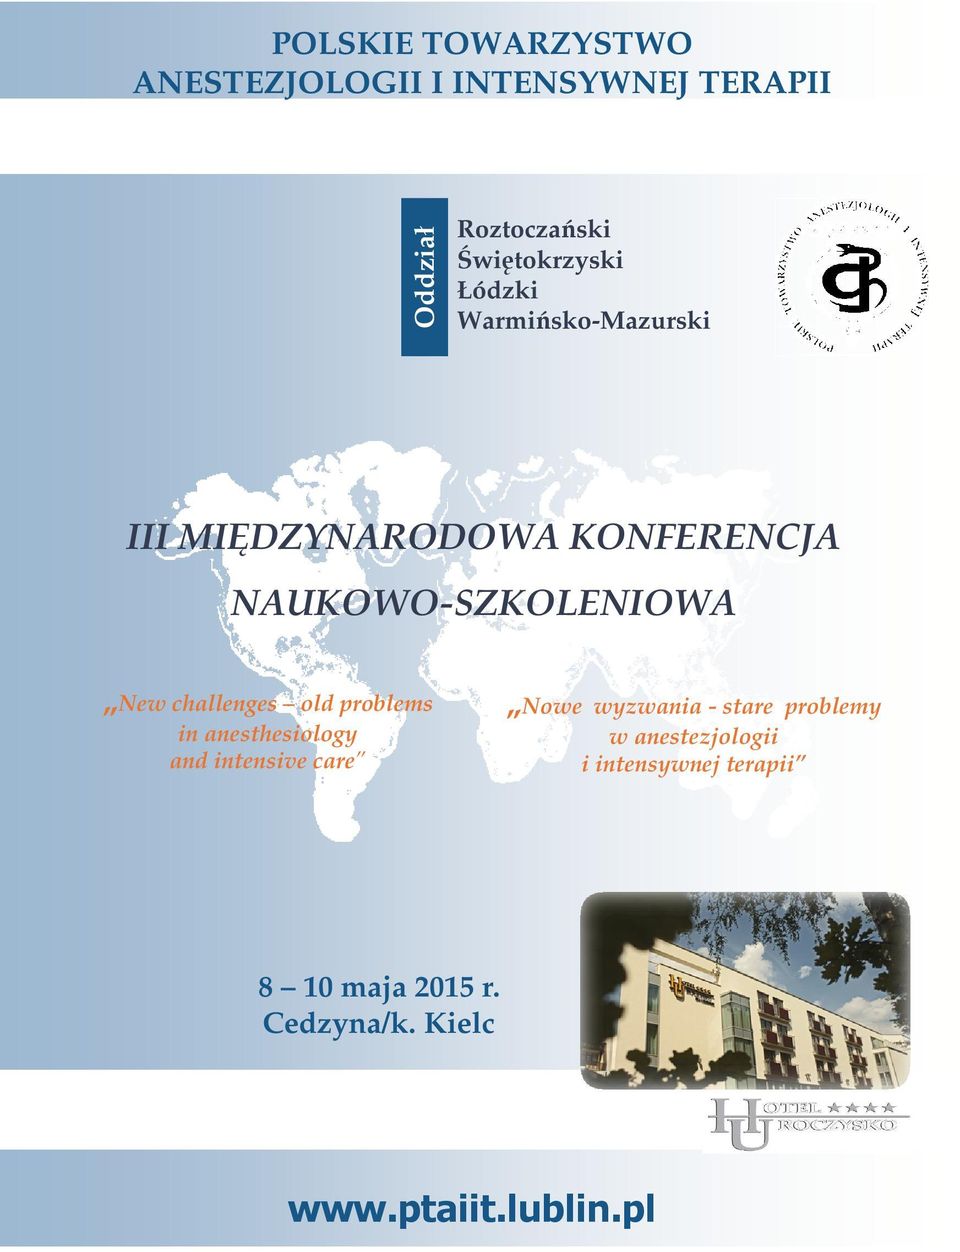 NAUKOWO-SZKOLENIOWA New challenges old problems in anesthesiology and intensive care Nowe